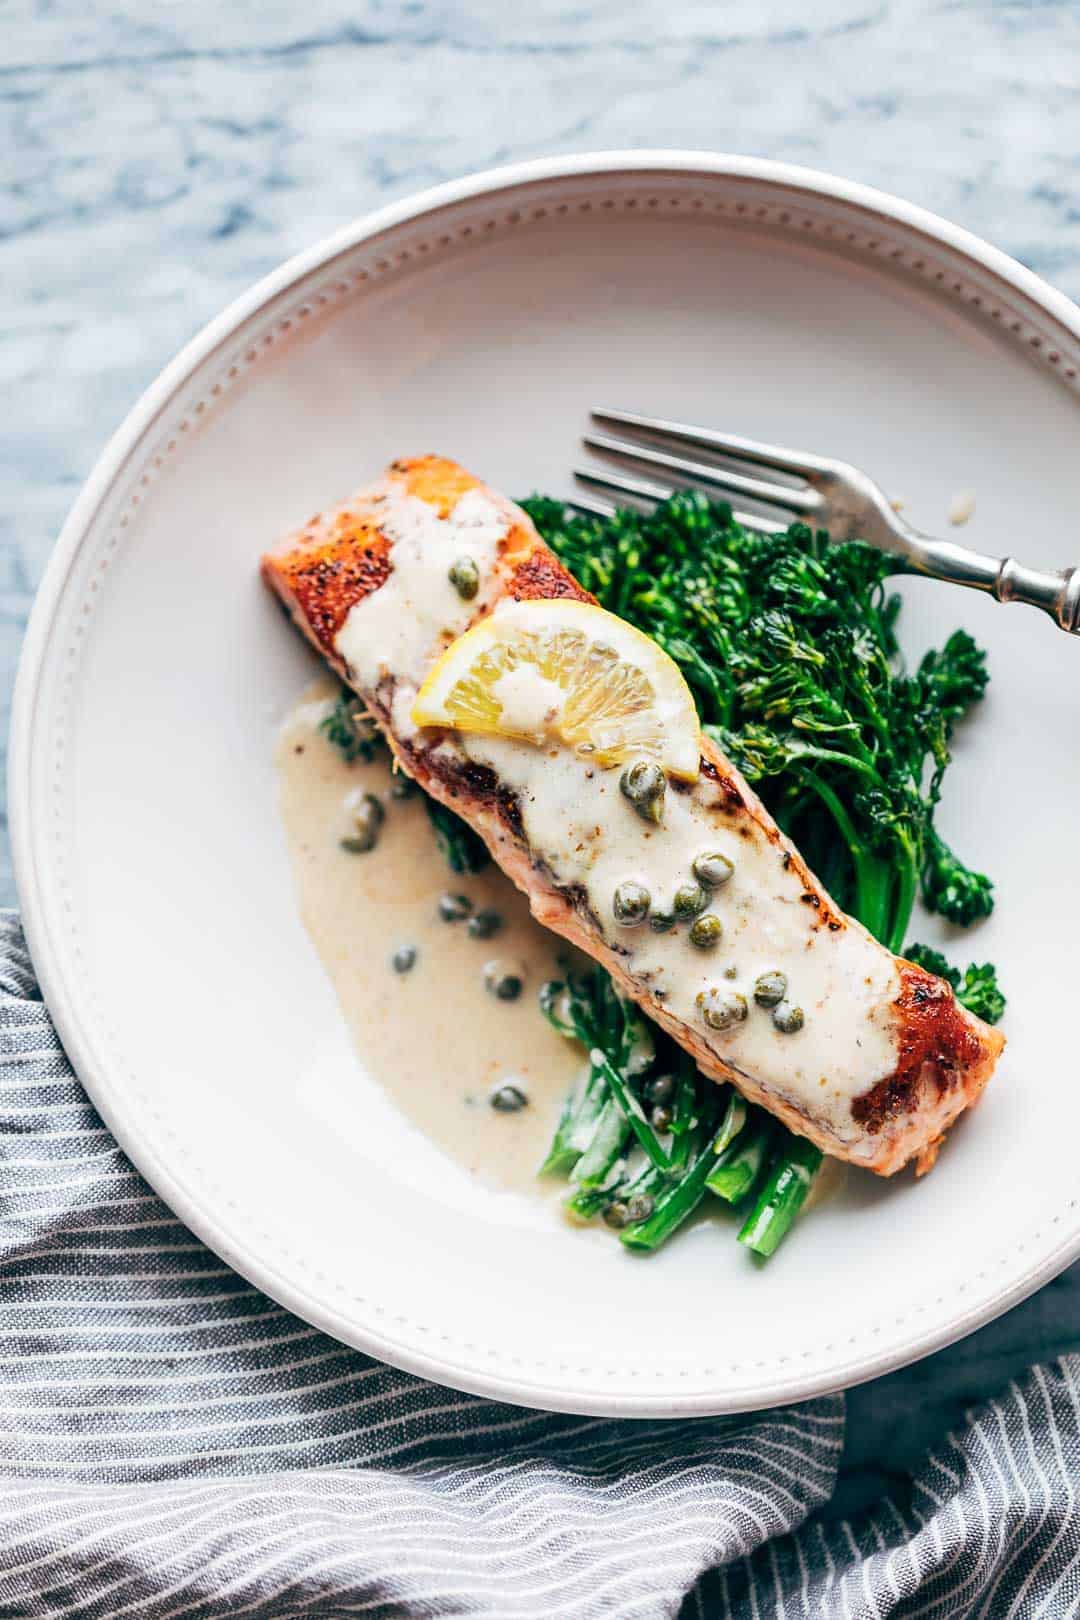 Creamy salmon piccata with lemon butter sauce served with steamed broccolini in a white bowl